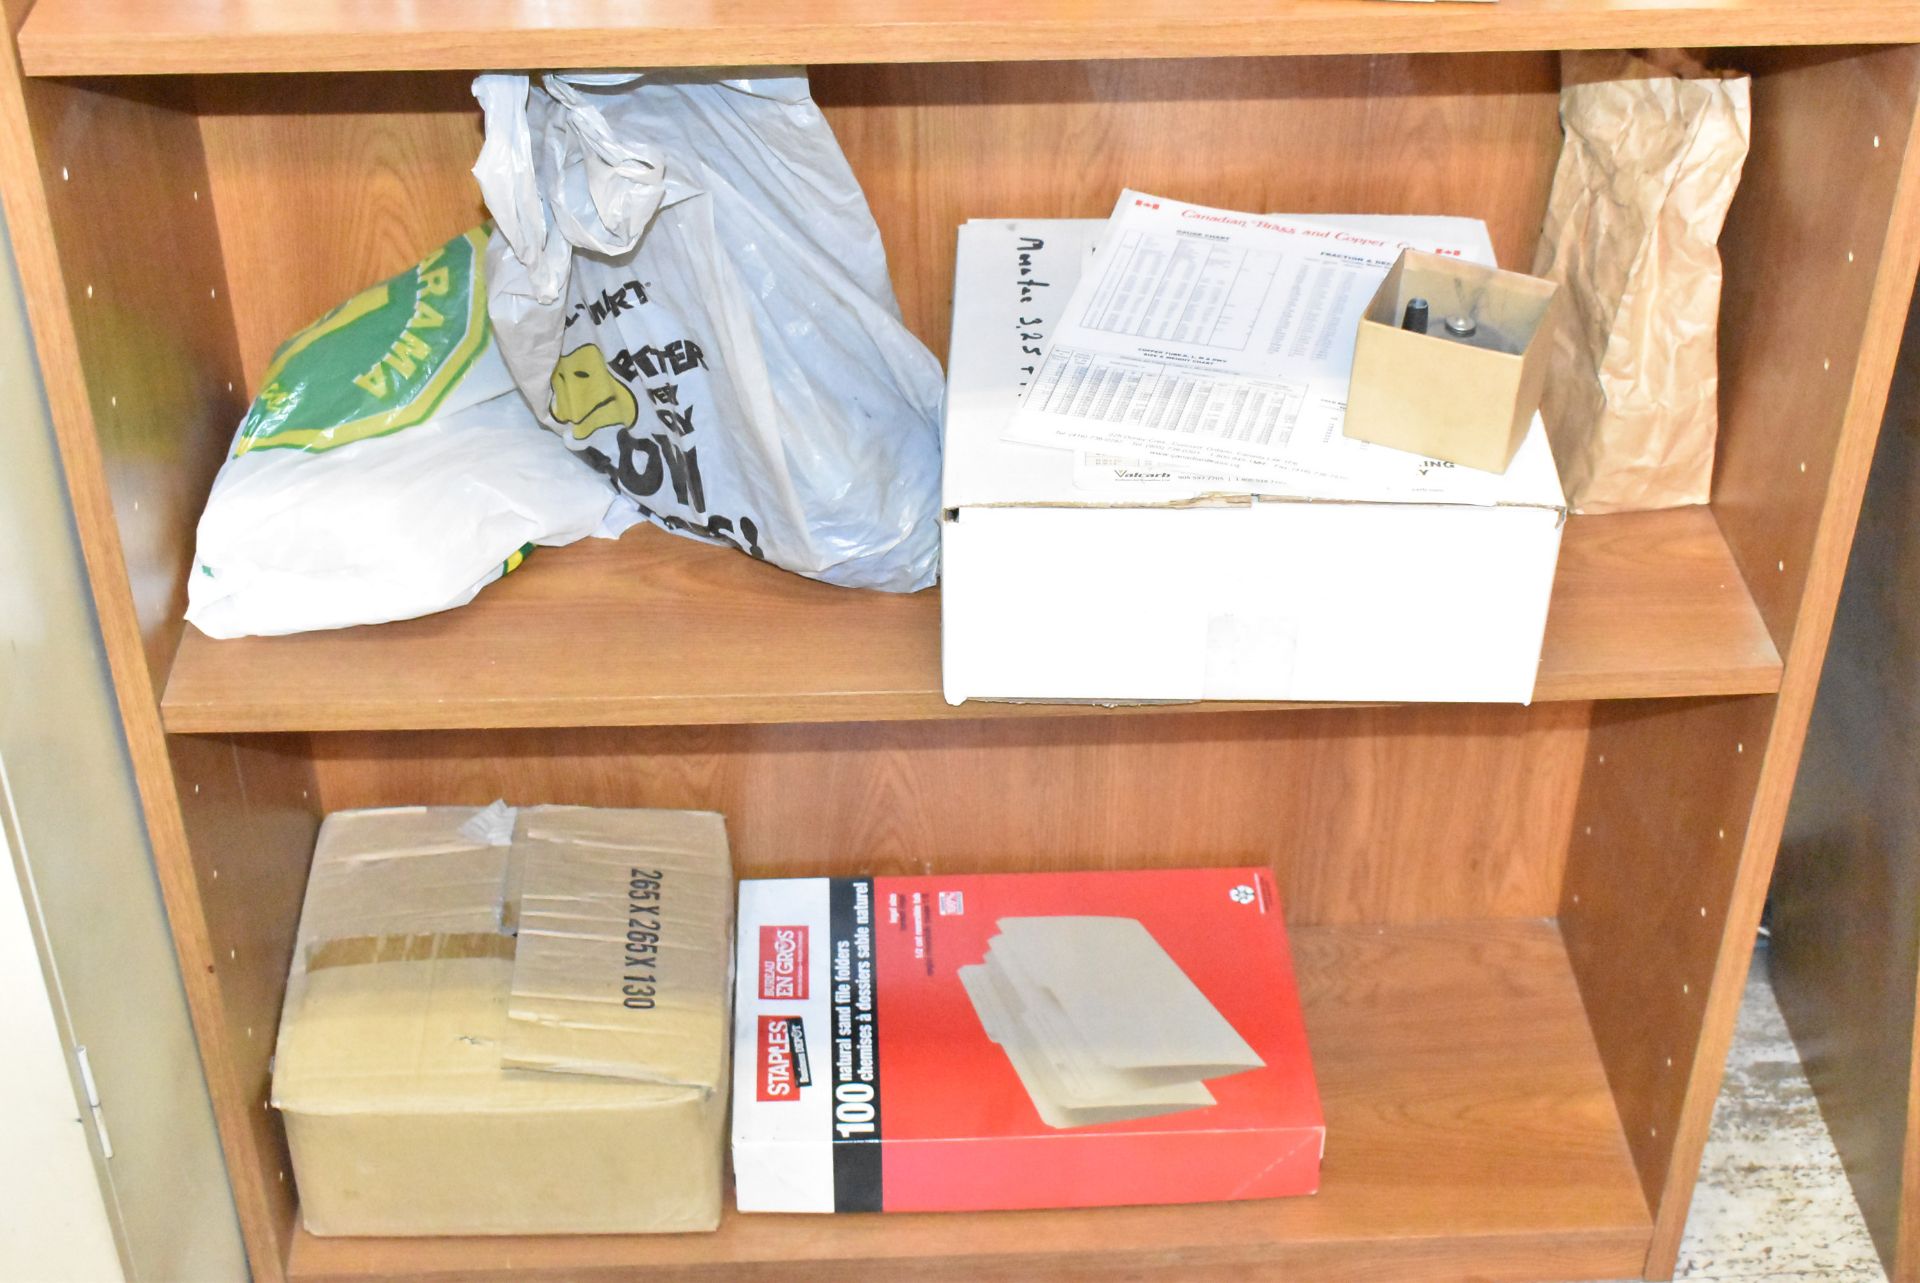 LOT/ REMAINING CONTENTS OF OFFICE - FURNITURE ONLY - INCLUDING DESKS, CHAIRS, BOOKSHELVES, FOLDING - Image 4 of 8